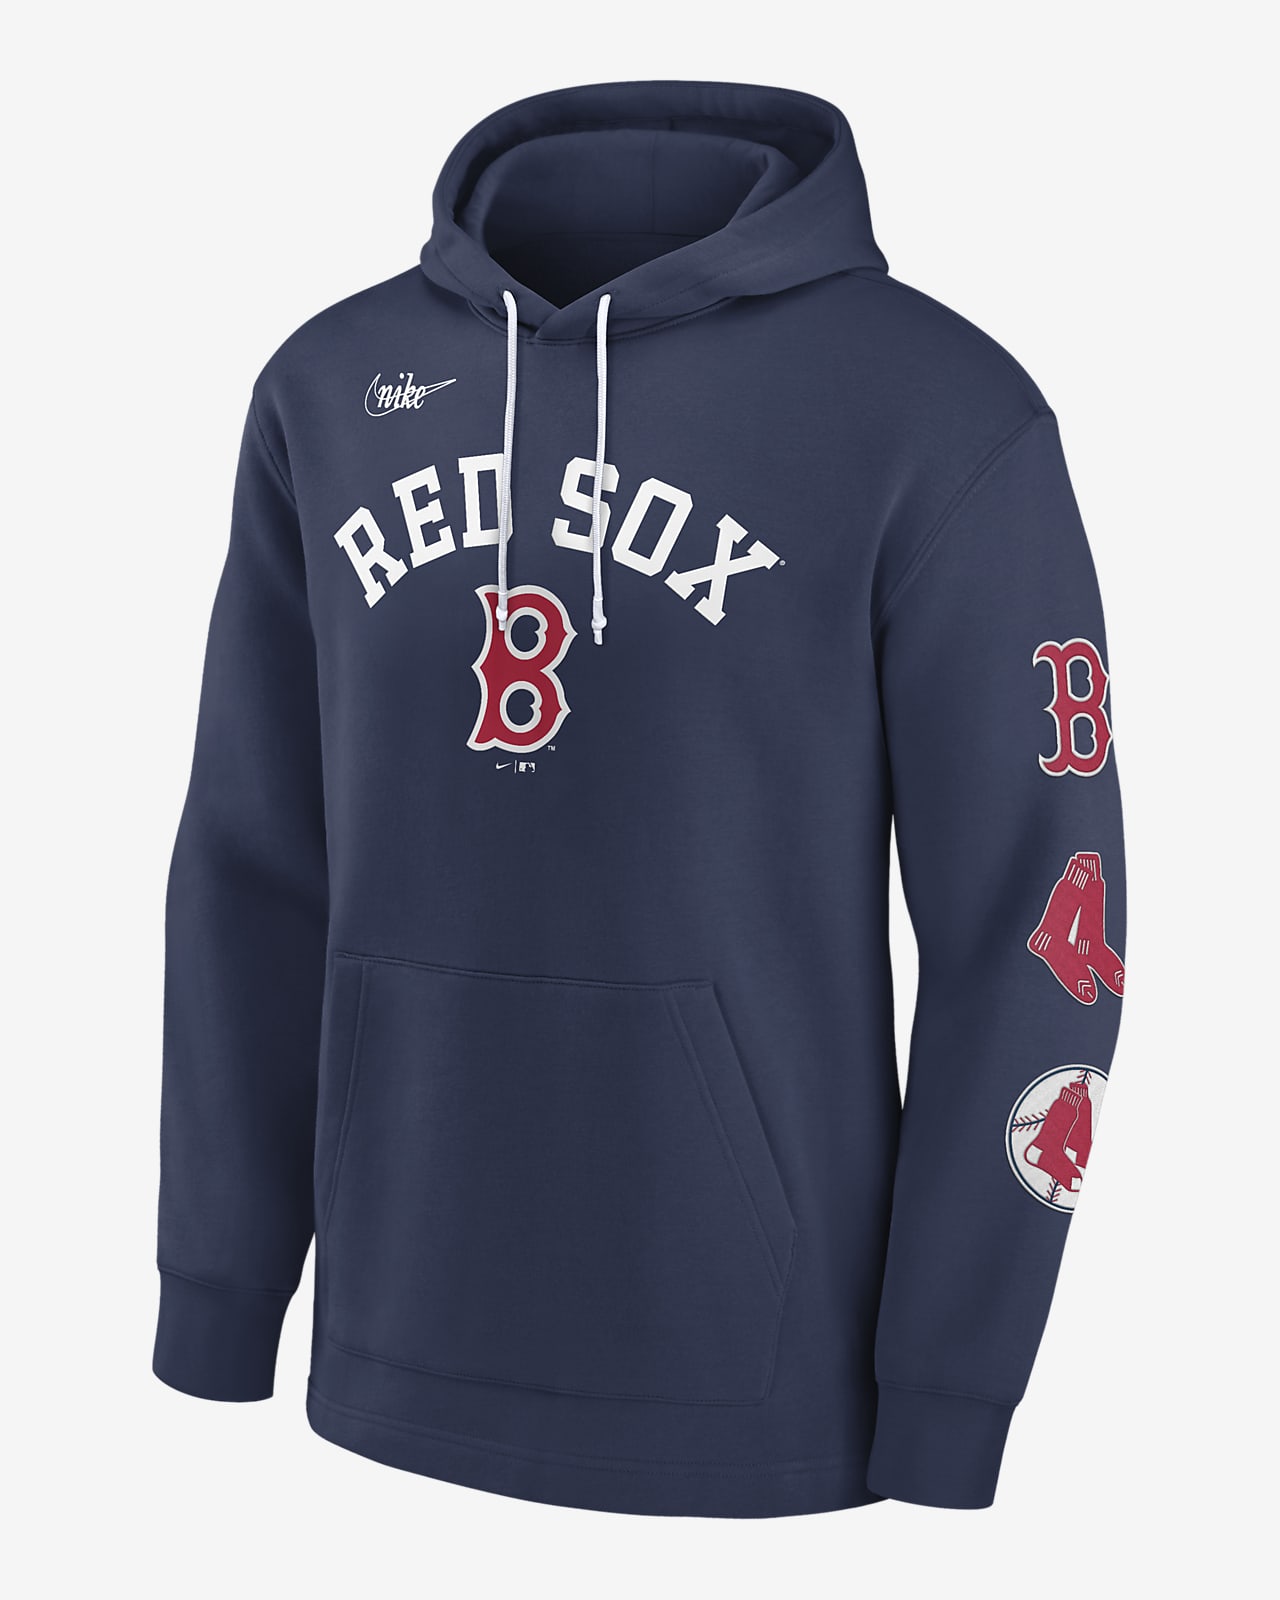 Buy Majestic Red Sox Online In India -  India